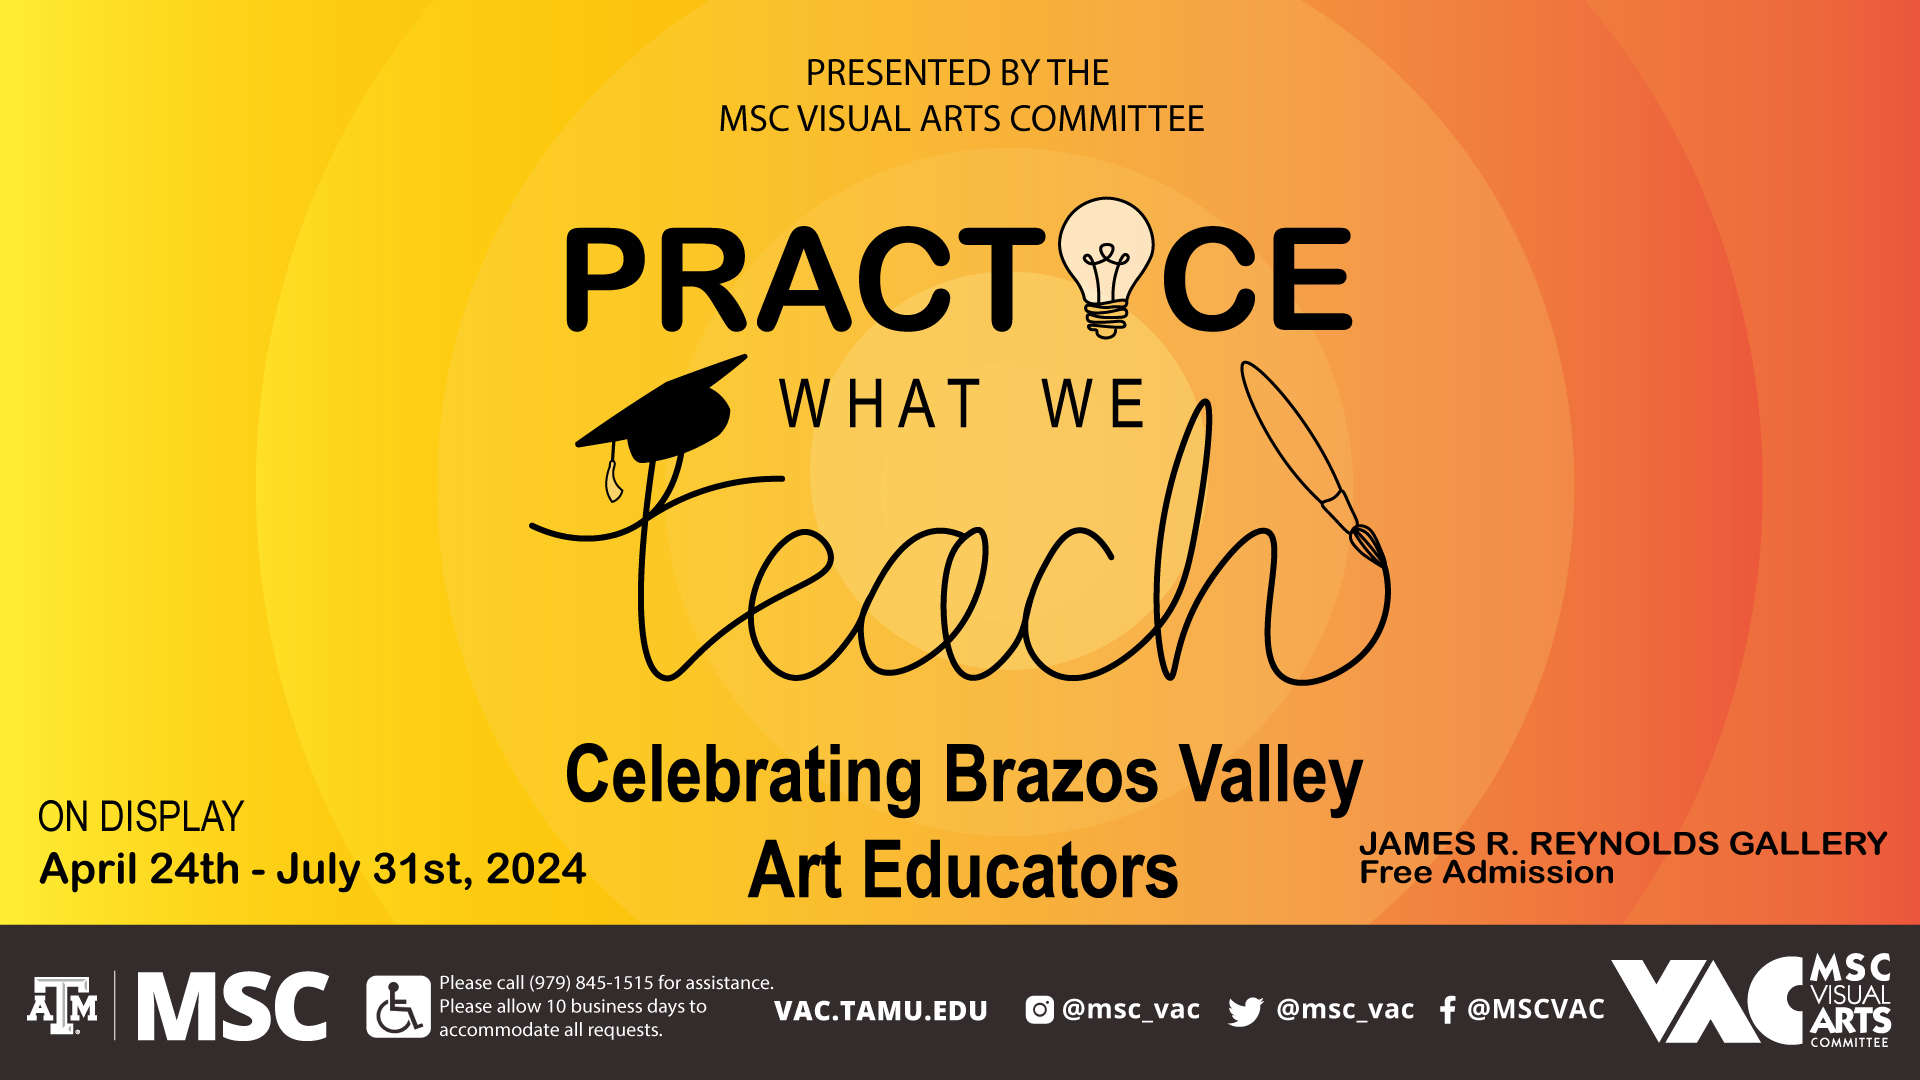 MSC VAC Presents Practice What We Teach, Celebrating Brazos Valley Art Educators , On display: April 24 to July 31 2024 at the James R. Reynolds Gallery, Free admission. Website: vac.tamu.edu, Instagram: @msc_vac, Twitter: @msc_vac, Facebook: @MSCVAC Please call 979 845 1515 for assistance. Please allow 10 business days to accommodate all requests.